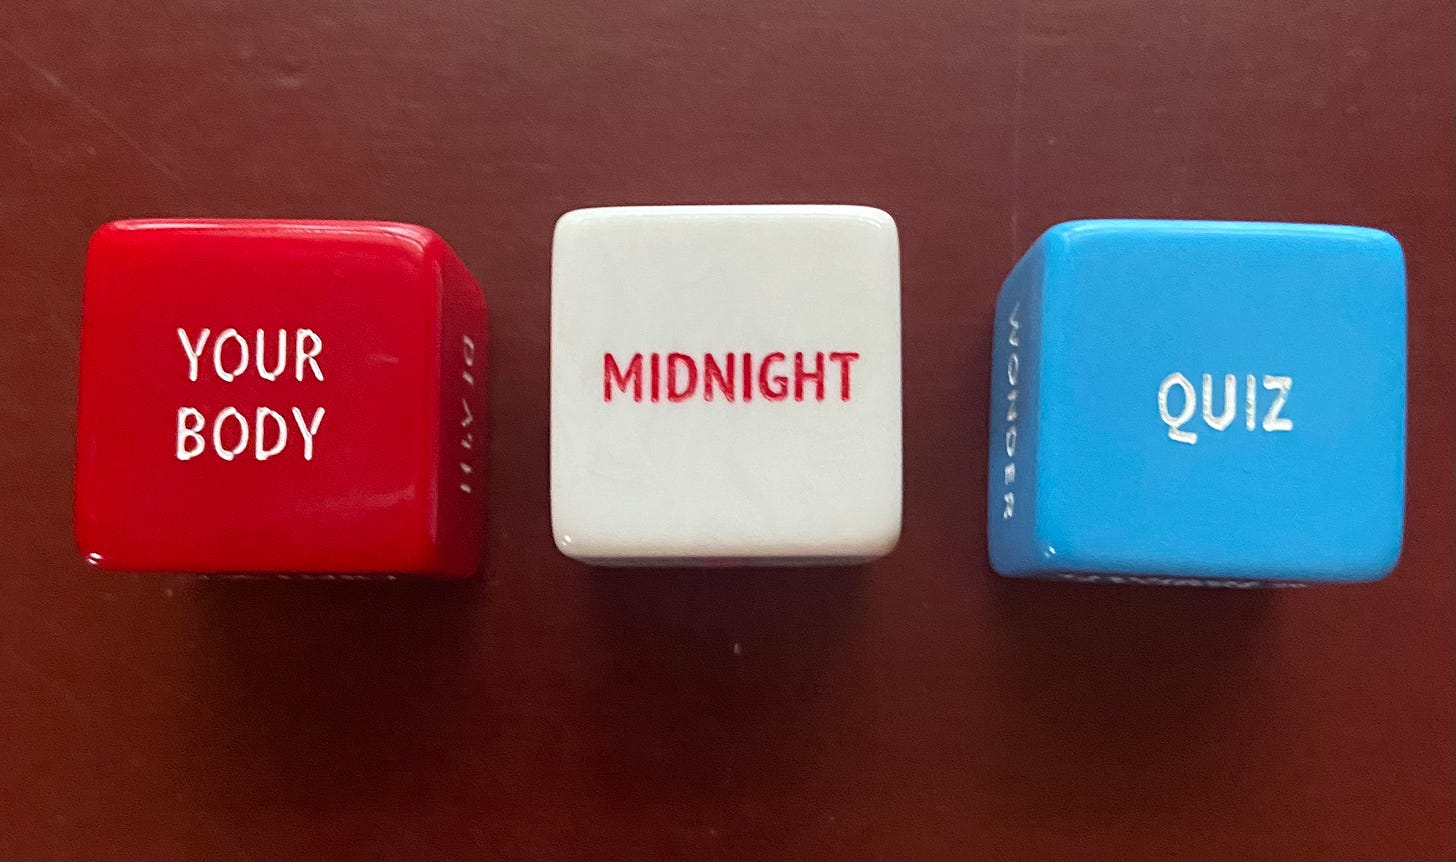 A red dice says, YOUR BODY, a white dice says, MIDNIGHT, and a blue dice says, QUIZ